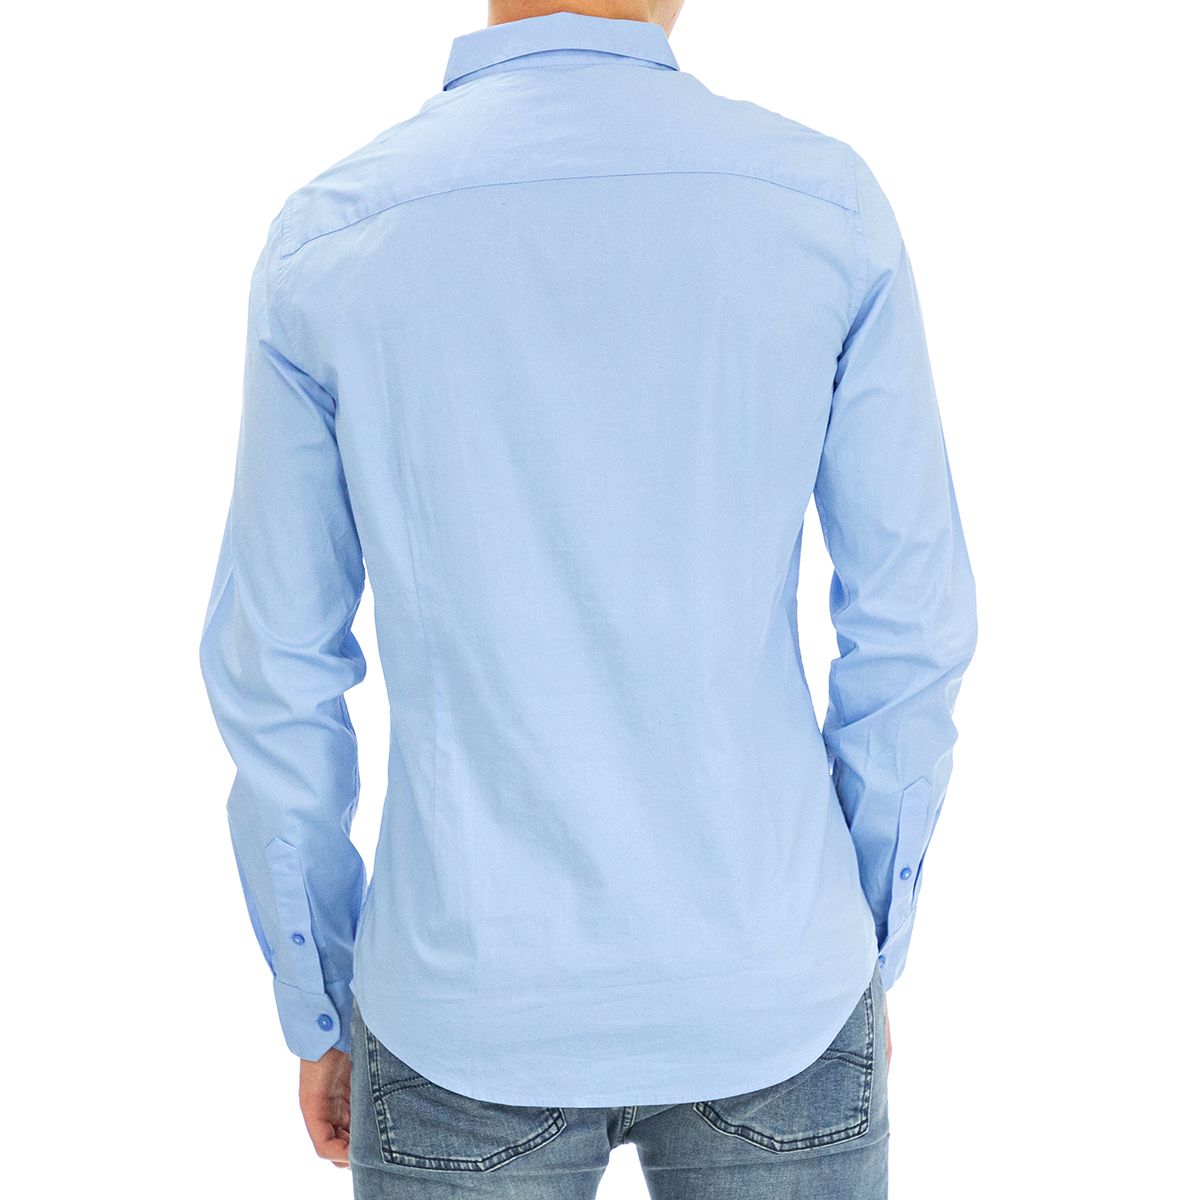 Armani Exchange 8NZC41ZN12Z-1504-S Classic and versatile, this light-blue shirt is an staple clothing piece that every man should keep in their wardrobe.